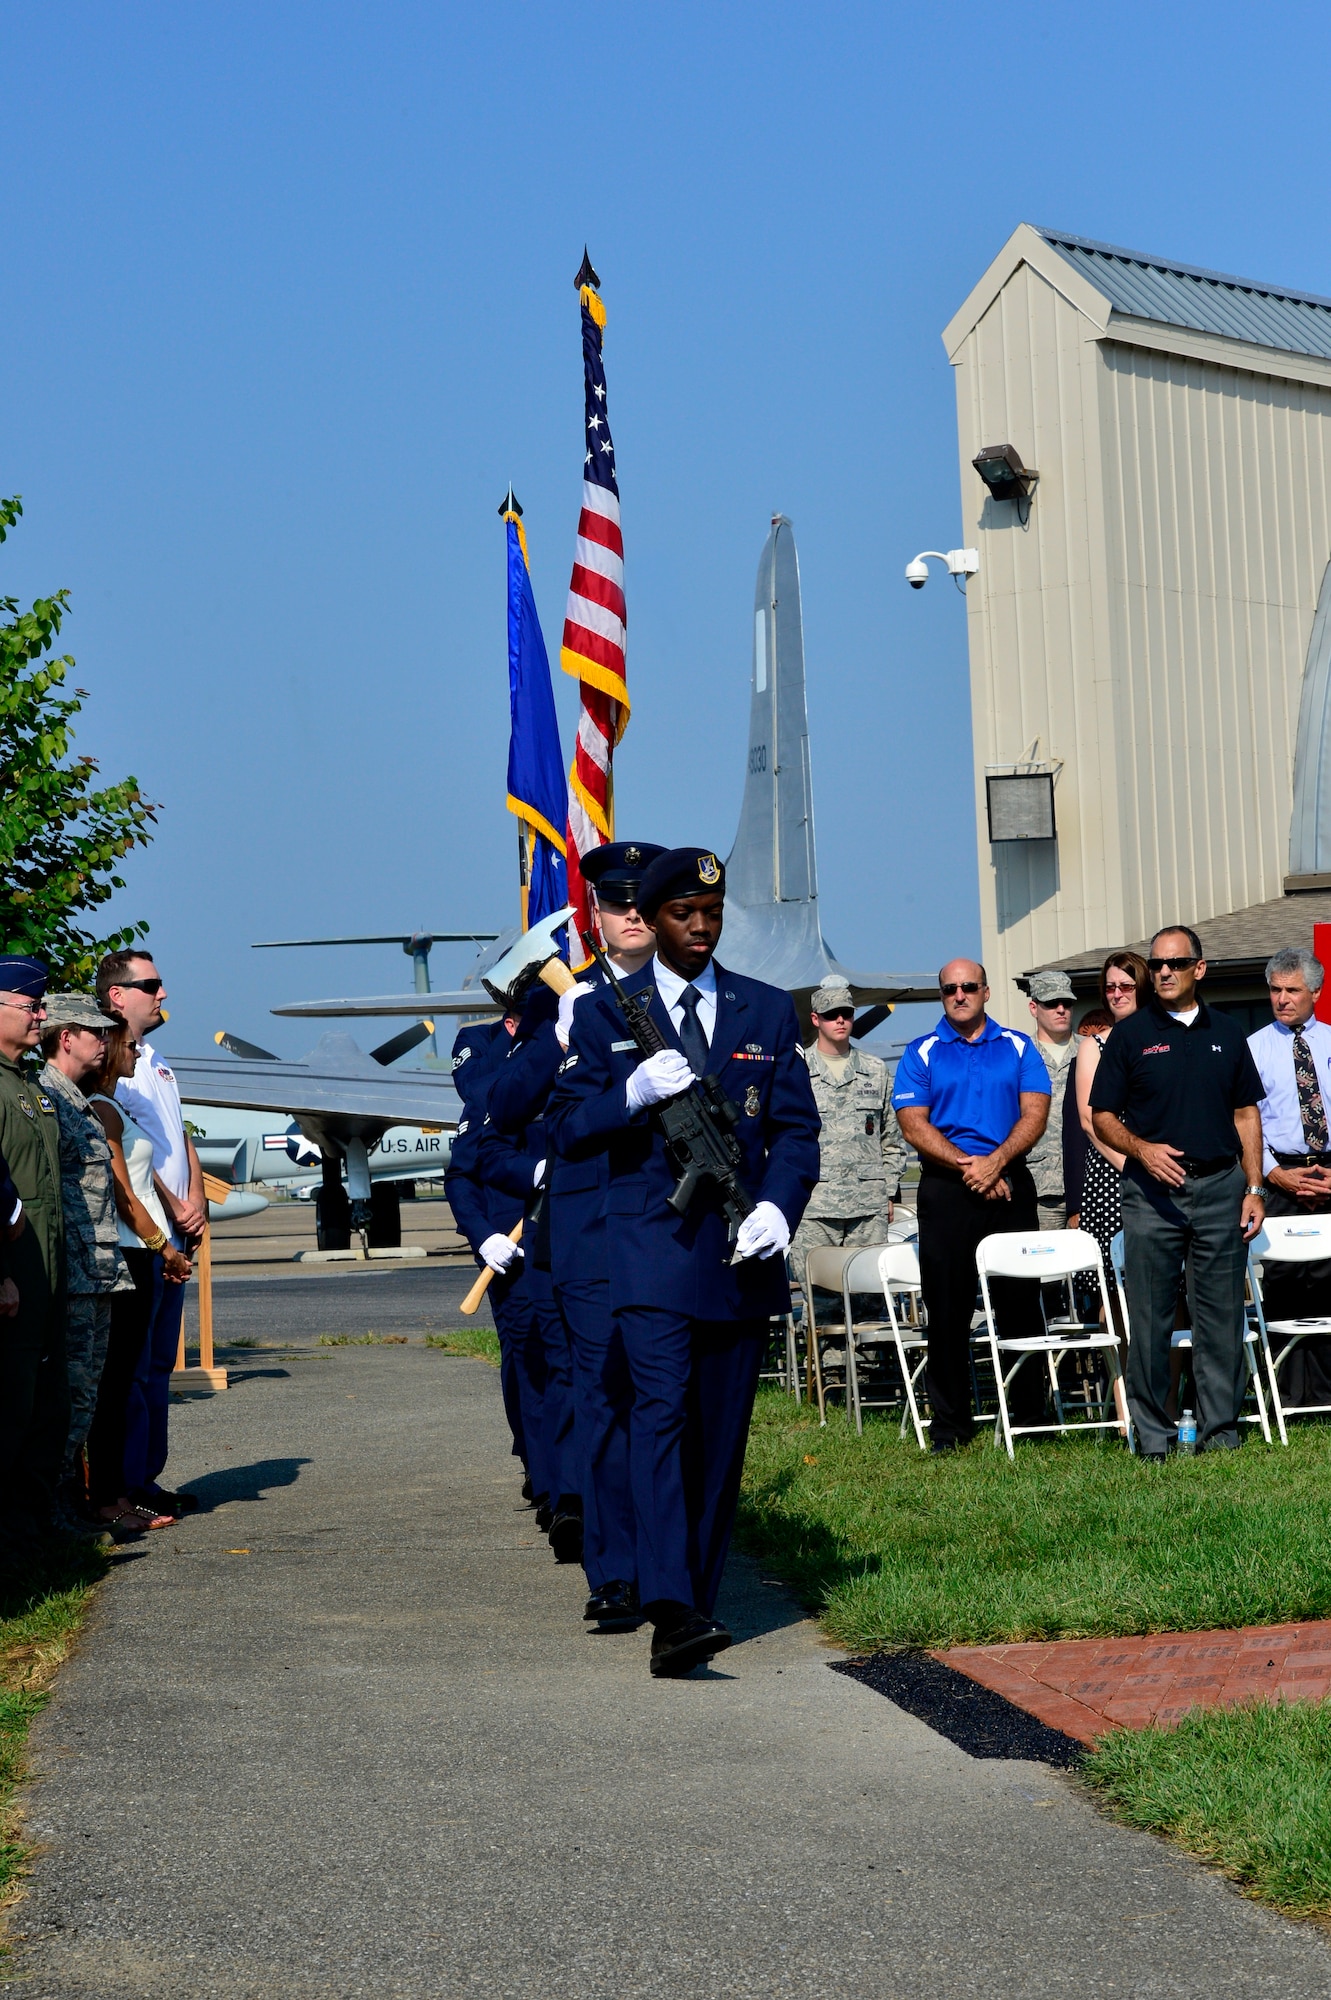 Members of the Dover Air Force Base Honor Guard march at the dedication of the Sept. 11 Memorial at the Air Mobility Command Museum, Dover Air Force Base, Del., Sept. 11, 2013. The memorial, which incorporates two pieces of steel from World Trade Center tower one, a rock from the United Airlines Flight 93 crash site and a block from the damaged portion of the Pentagon, was unveiled at the ceremony.  (U.S. Air Force photo/David S. Tucker)